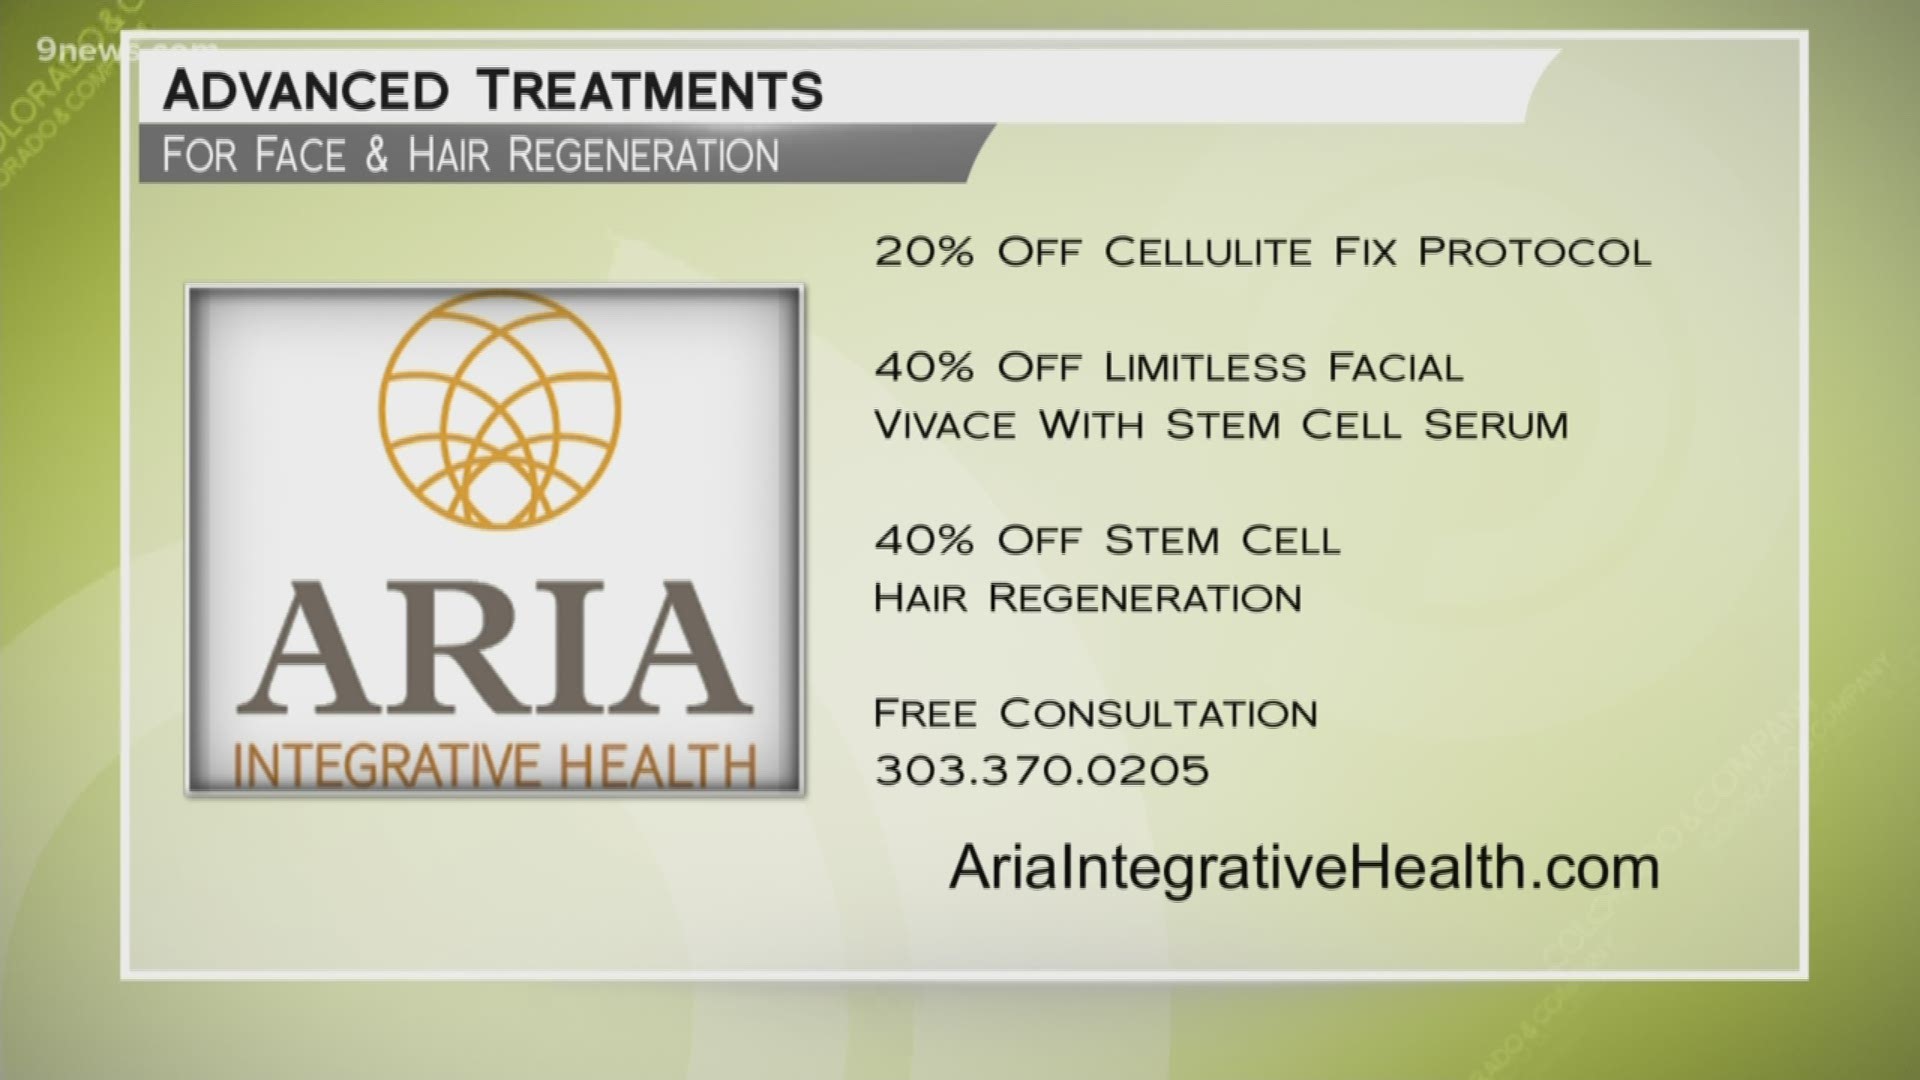 Get special pricing on several treatments at Aria Integrative Health. Call 303.370.0205 or visit www.AriaIntegrativeHealth.com for today's specials and to learn more